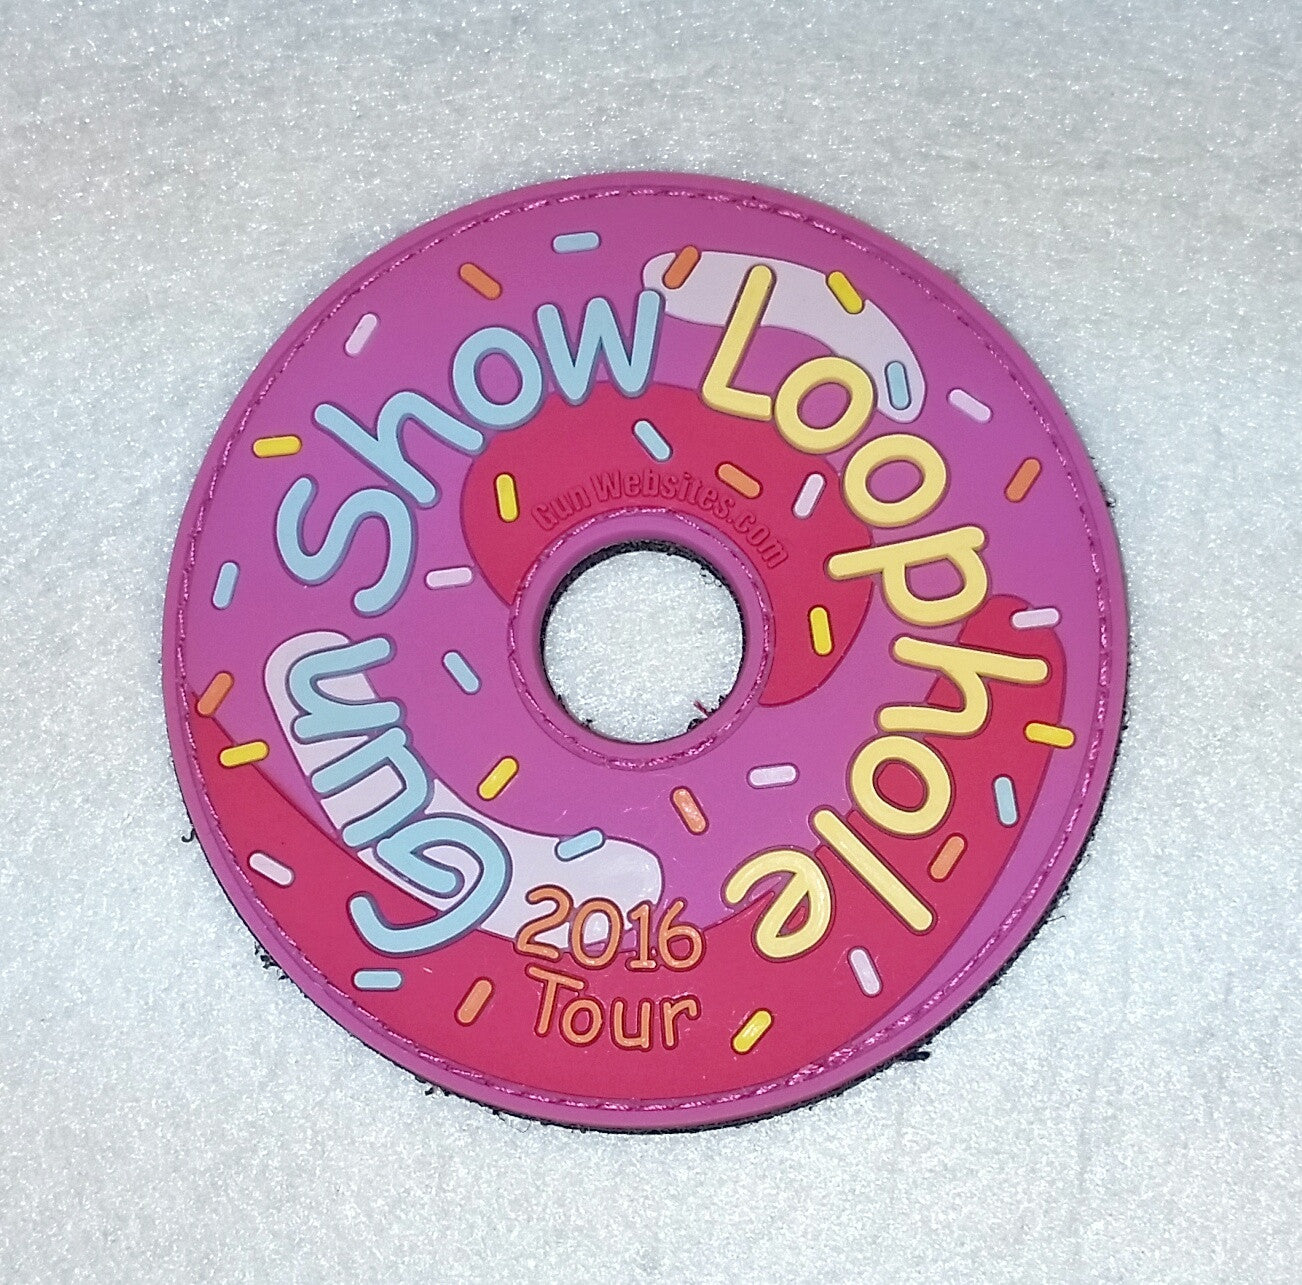 Sold Out - Gun Show Loophole Donut